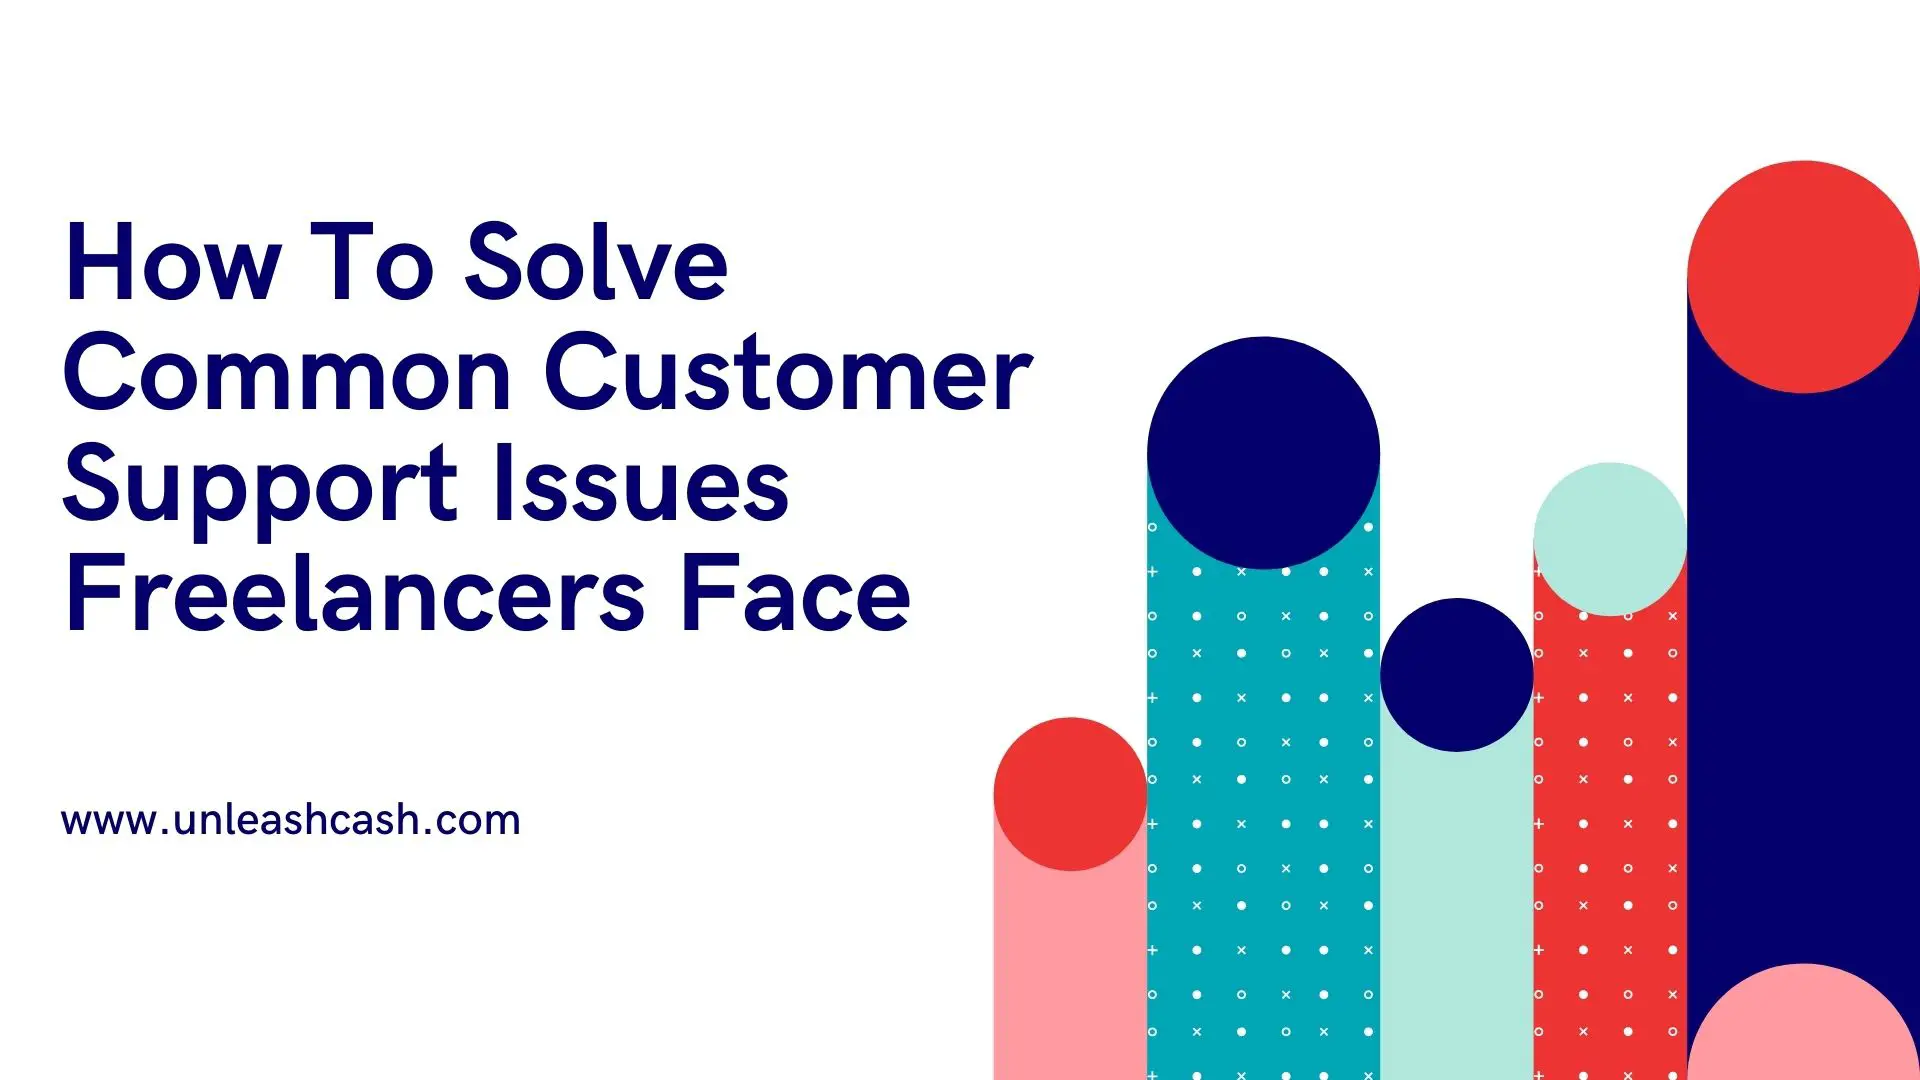 How To Solve Common Customer Support Issues Freelancers Face